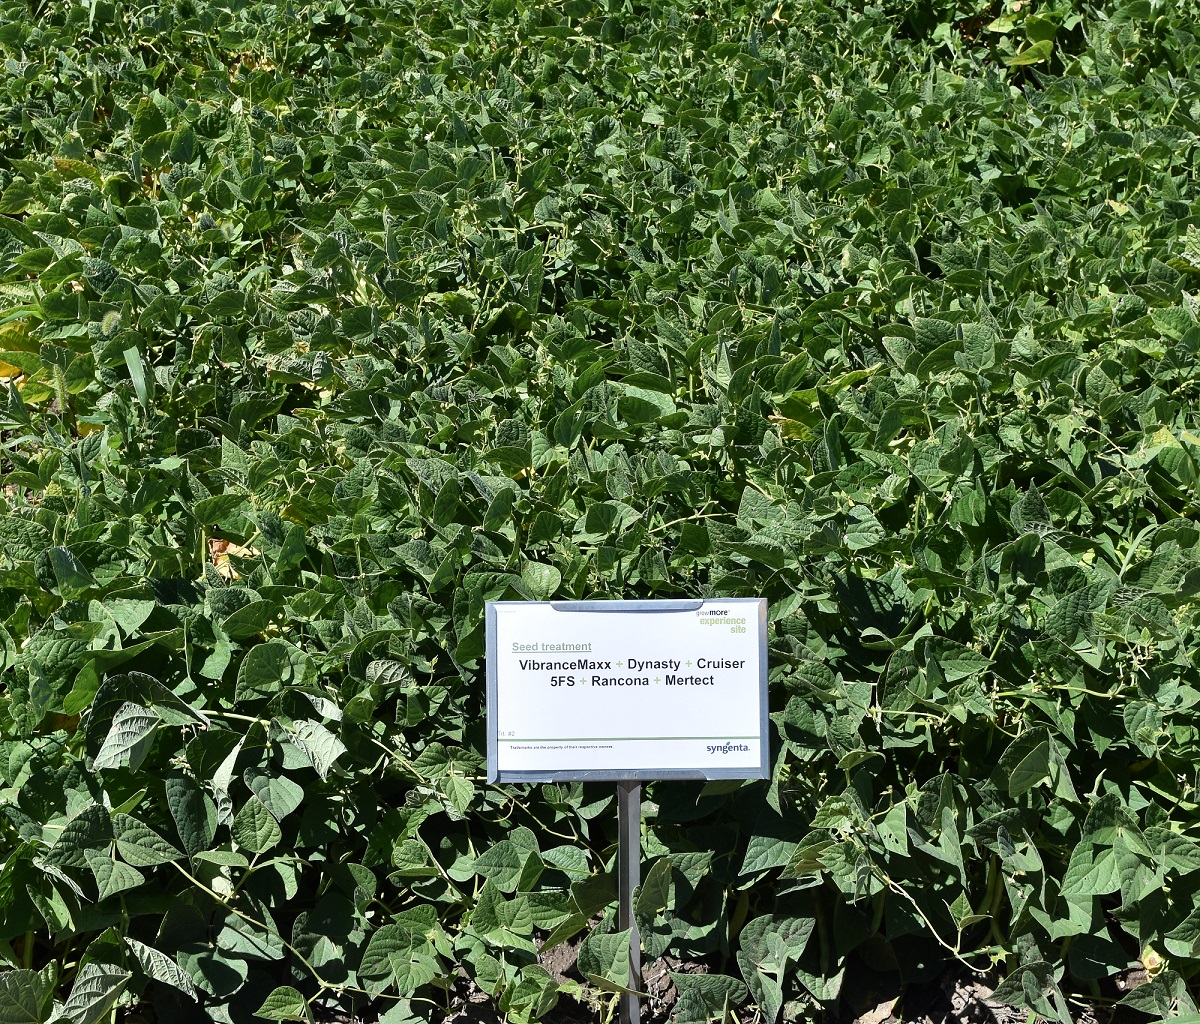 This agronomic image shows a dry beans plot.